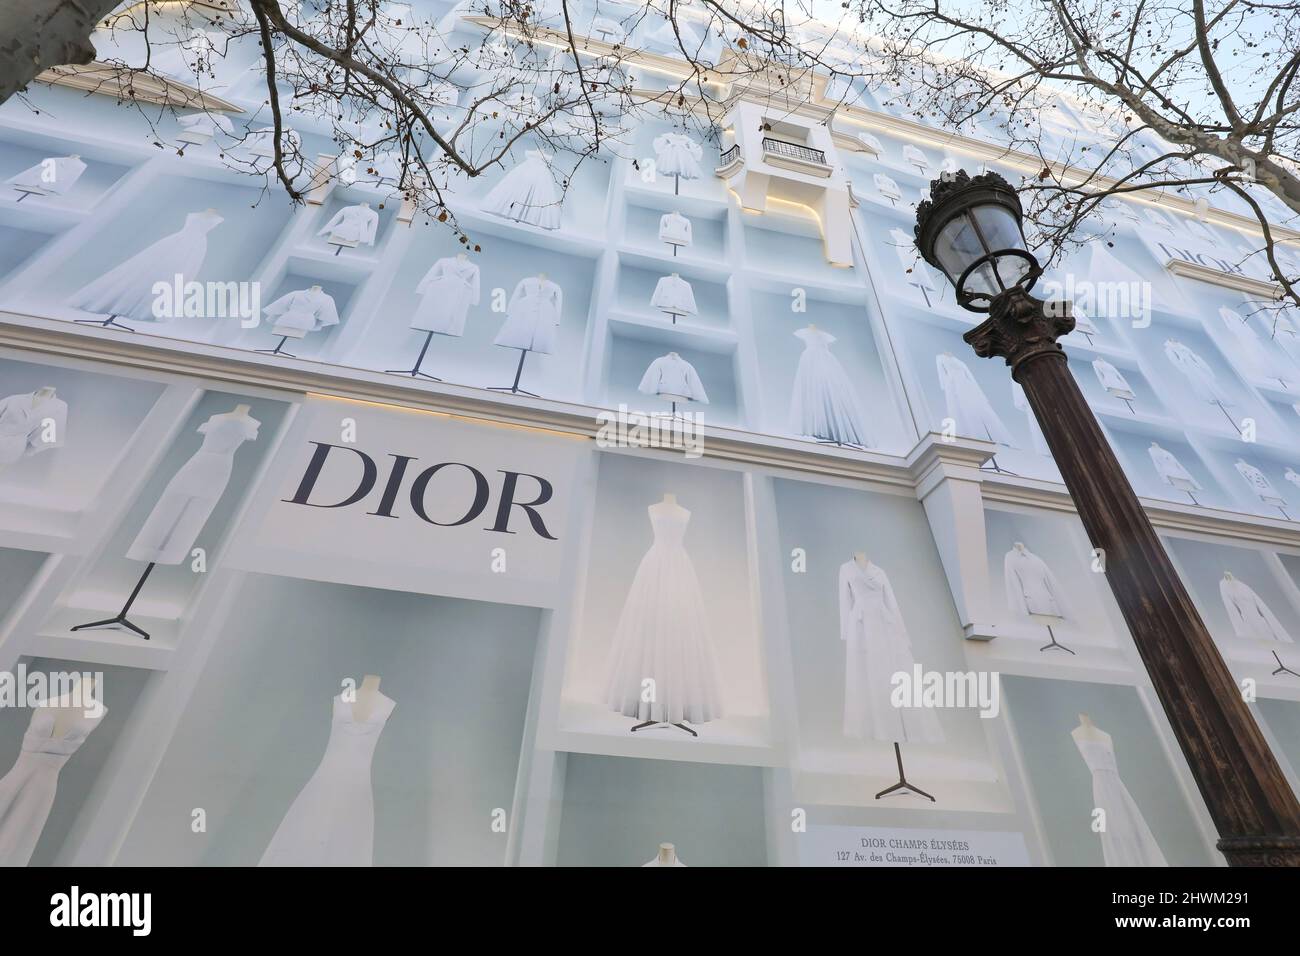 DIOR BOUTIQUE ON THE CHAMPS ELYSEES, PARIS Stock Photo - Alamy